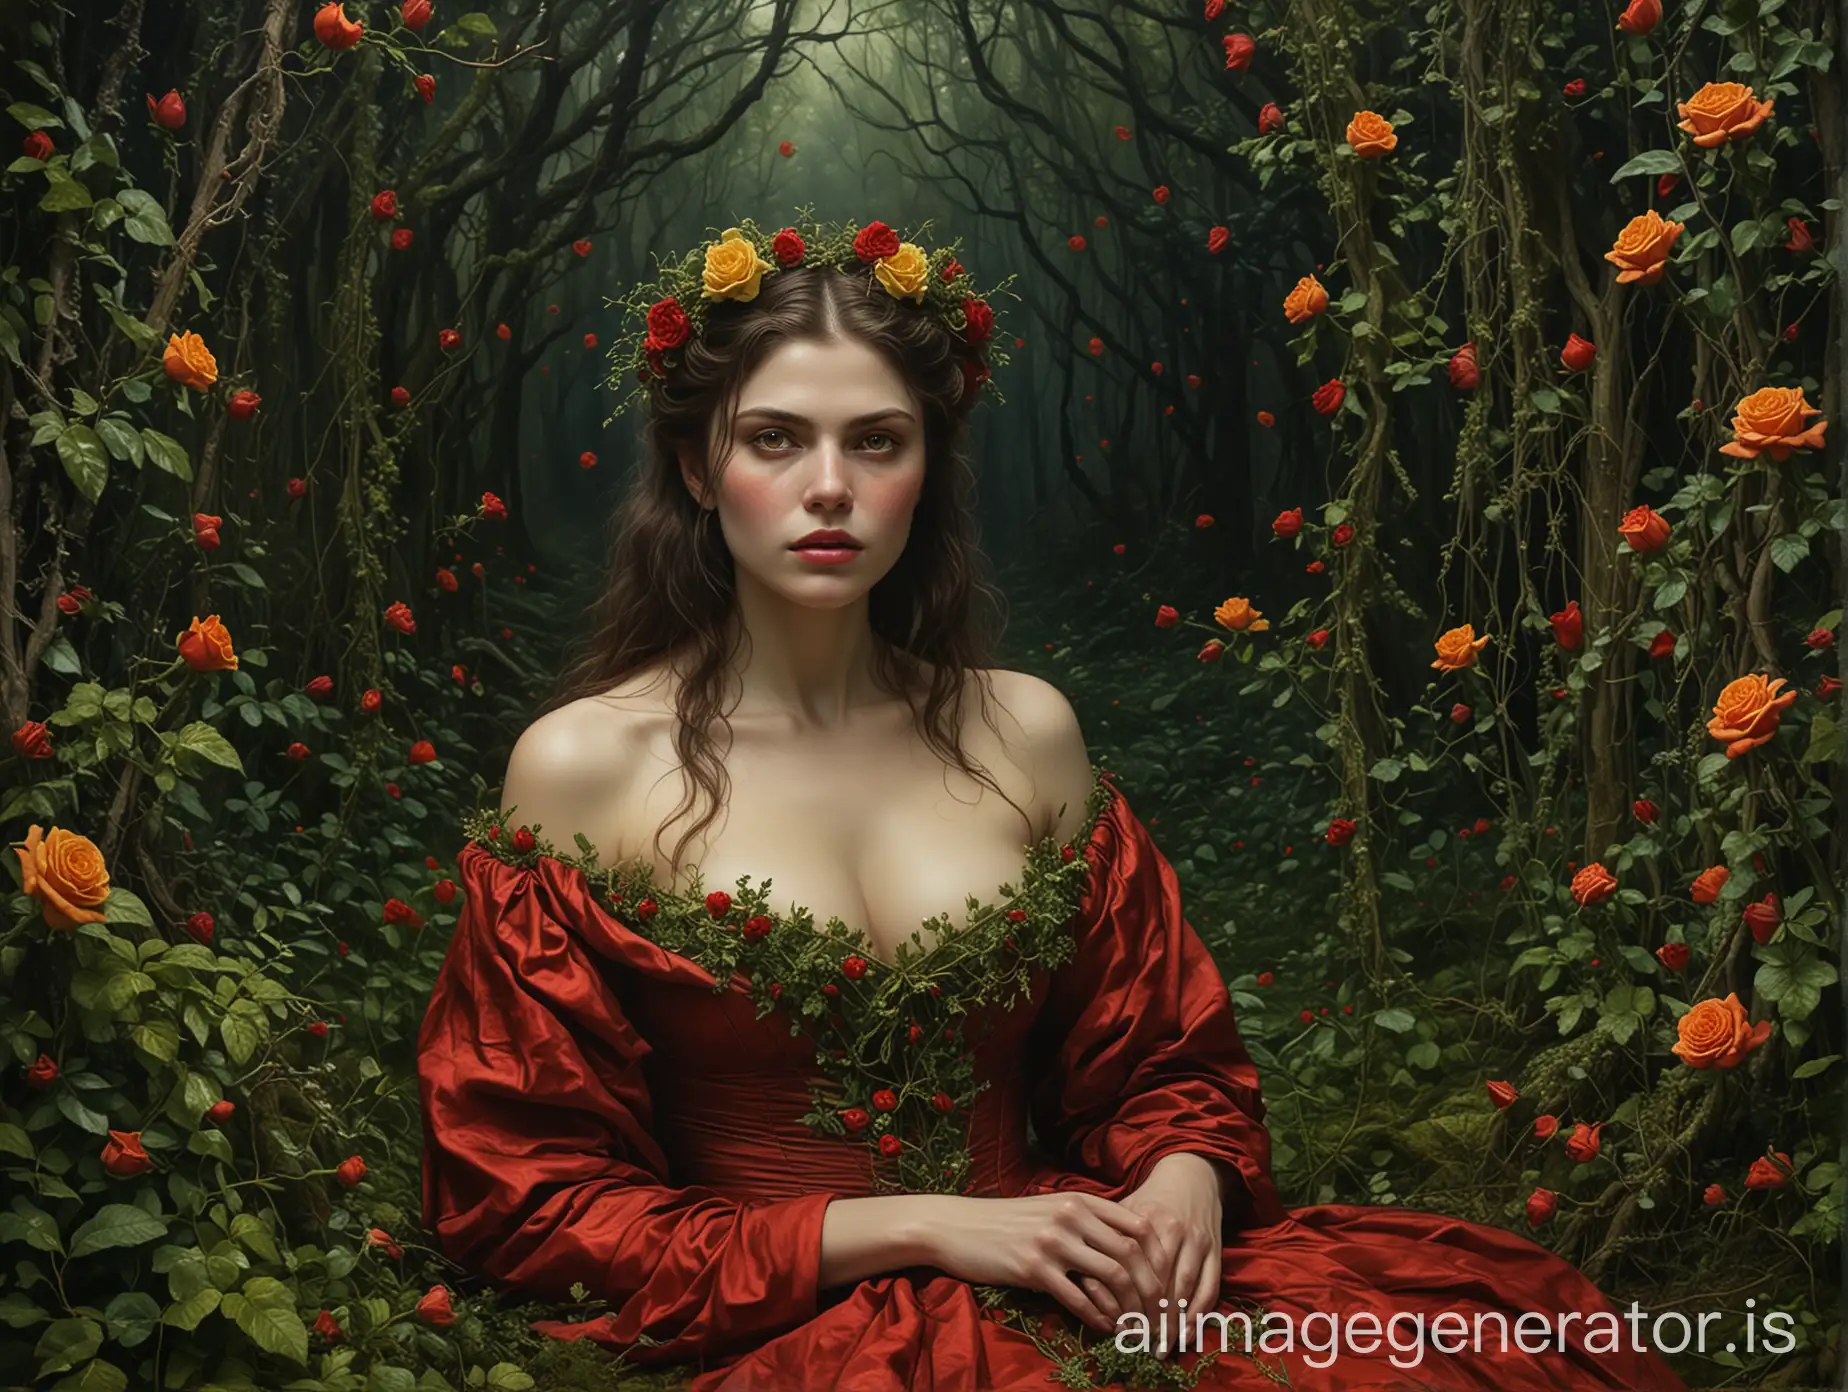  A surrealistic oil painting, reminiscent of late-19th-century Symbolism, shows a woman with glowing yellow eyes, alexandra daddario face. She is sitting on the mossy ground. Her body is tightly enshrouded in emerald green vines with thorns, punctuated by red roses. The same blend of thorns, green veins, and redroses emerge from her hair, which is an awe-inspiring display of nature and transformation. These natural elements seep into everything, wrapping even the darkest corners, and patrons are ensnared in this stunning spectacle. The lady is garbed in a full-length vermilion gown which contributes to the visual drama, and her hand gracefully navigates through the bramble in a daring move. Behind this spectacle, a dark forest adds an integral backdrop, cloaking everything in mystery and intrigue.